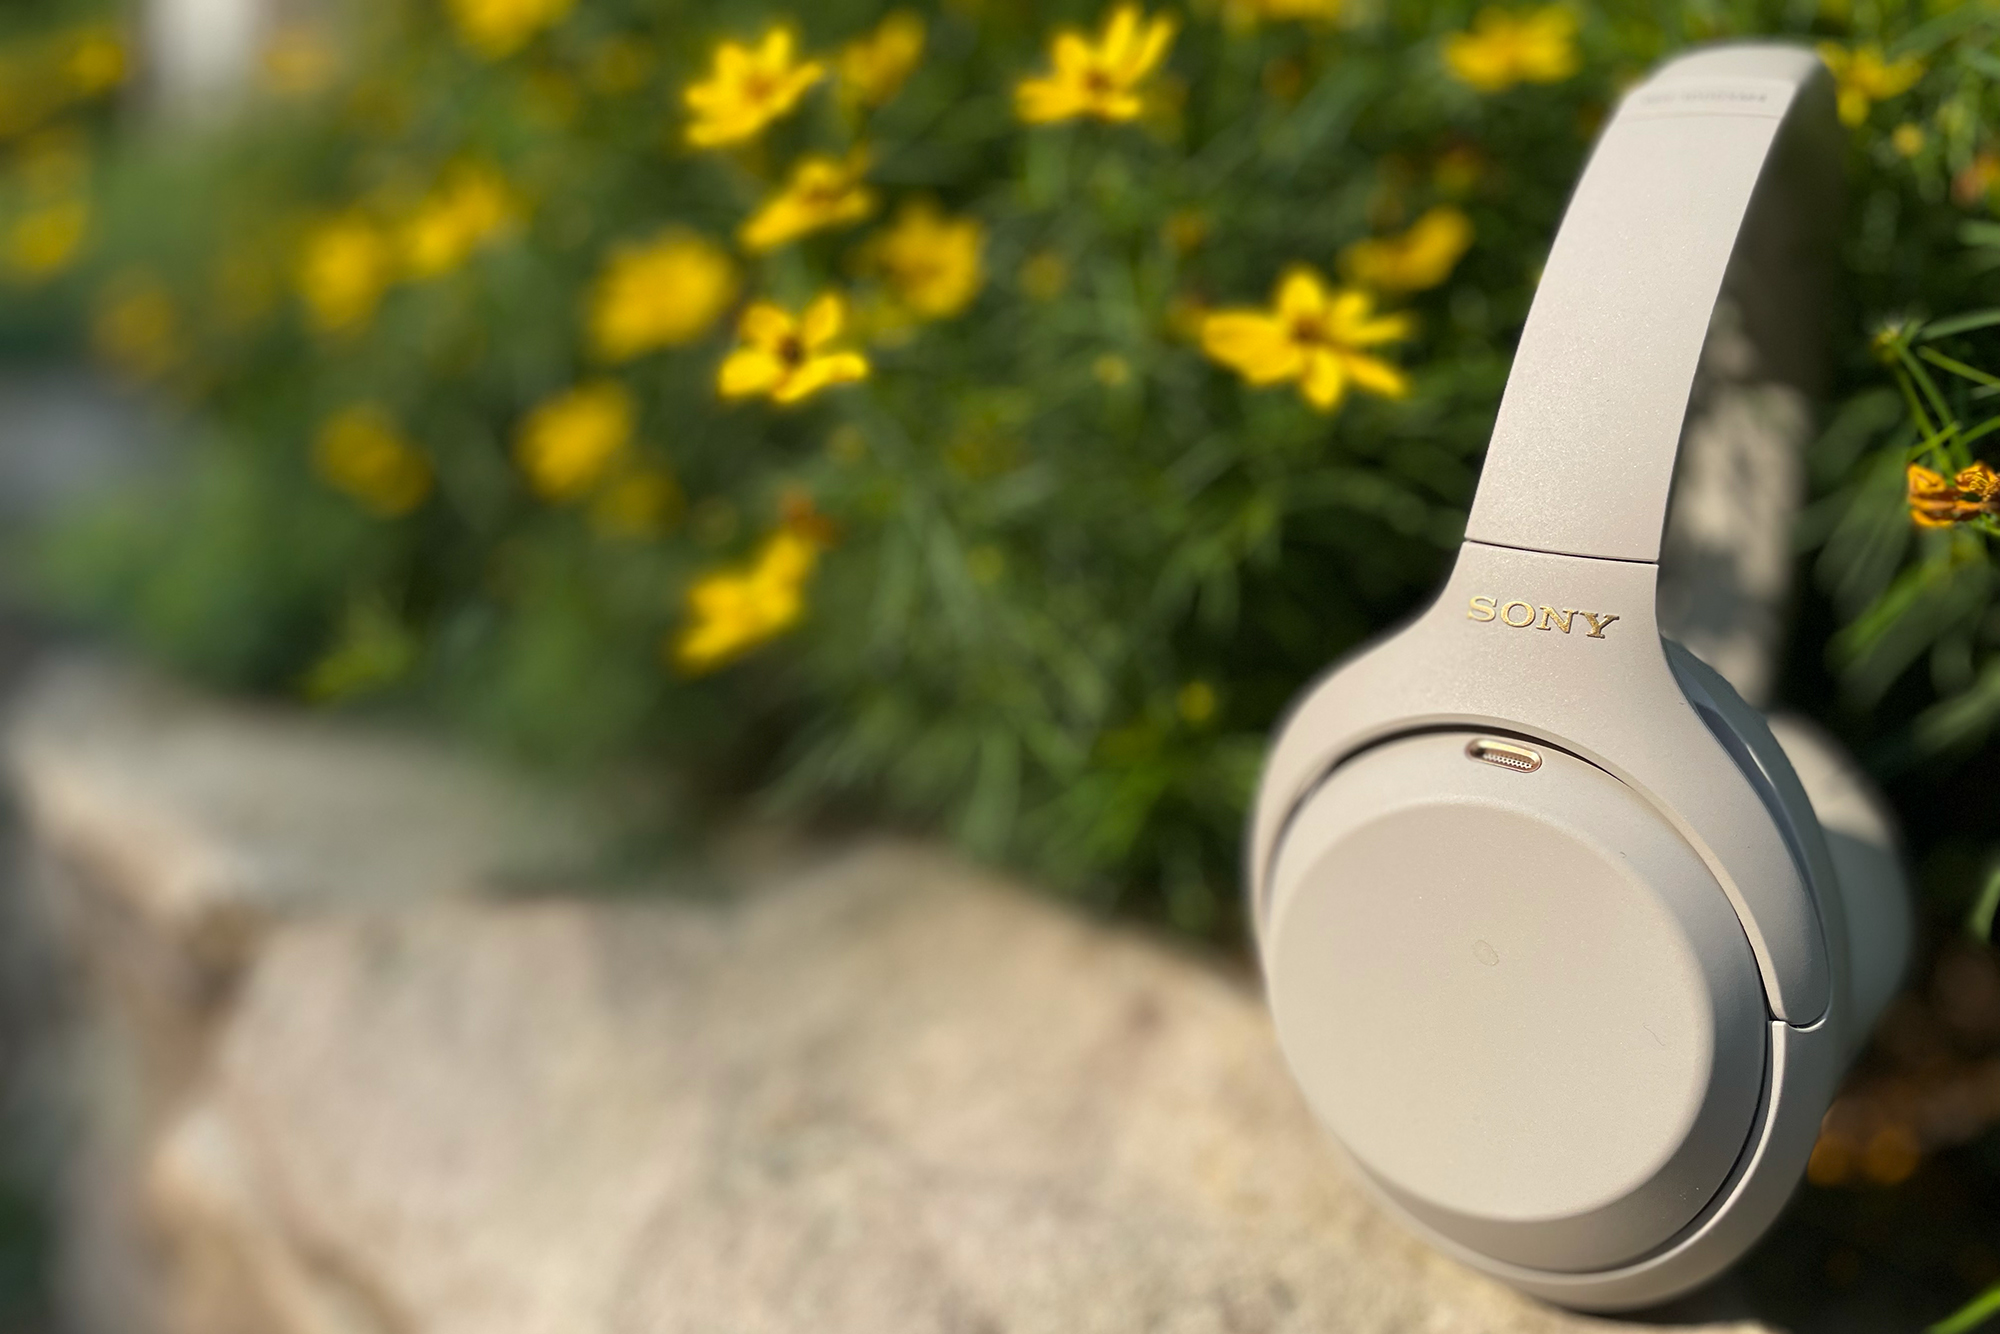 Sony WH-1000XM4 wireless headphones review: great-value Bluetooth